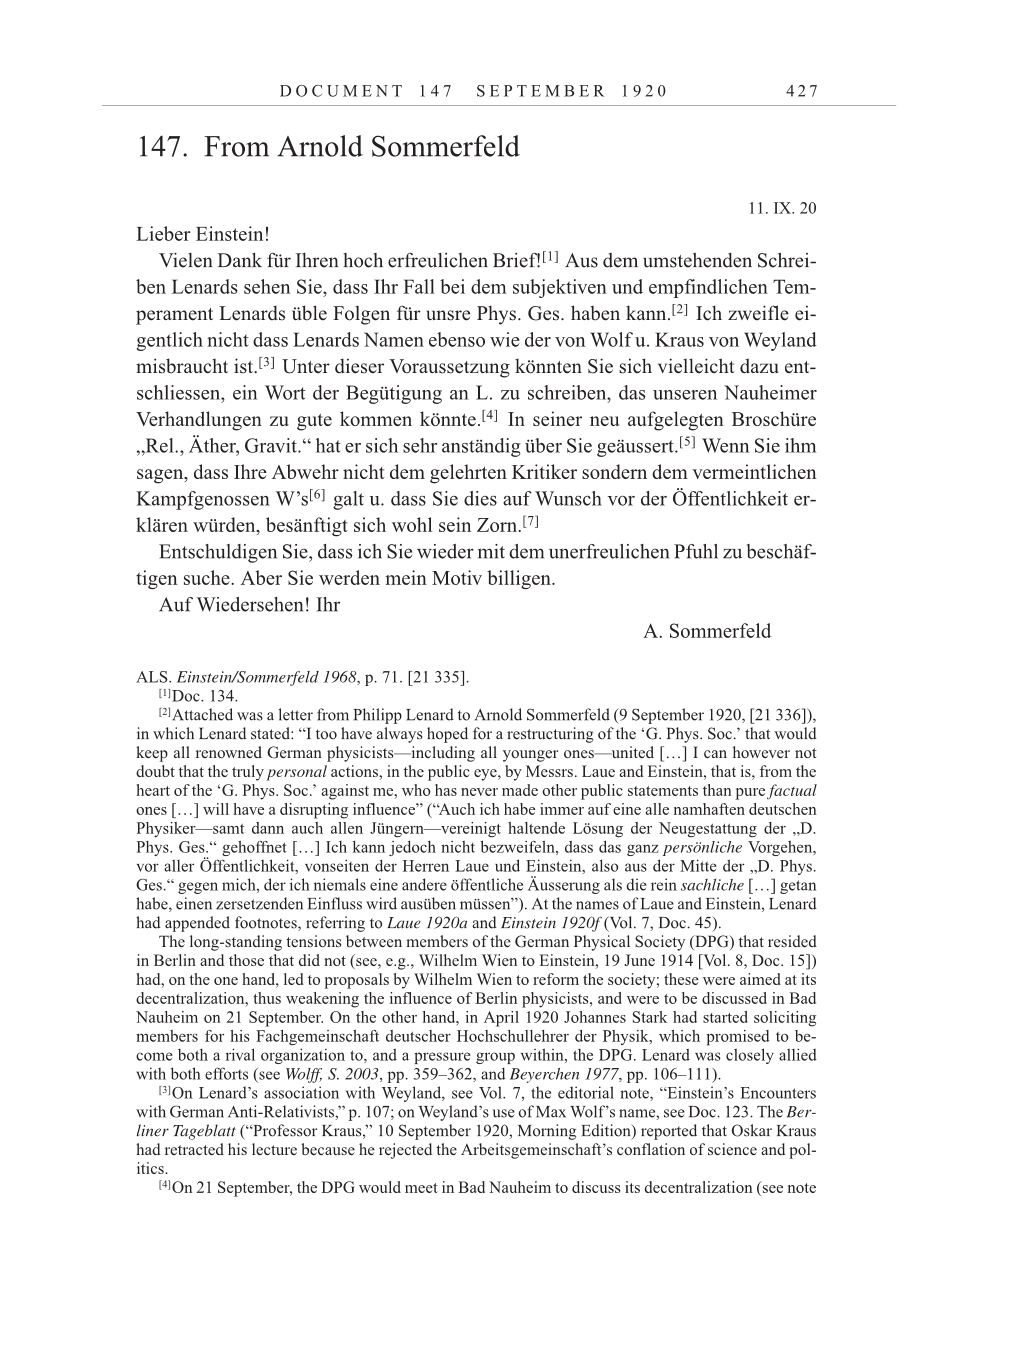 Volume 10: The Berlin Years: Correspondence May-December 1920 / Supplementary Correspondence 1909-1920 page 427